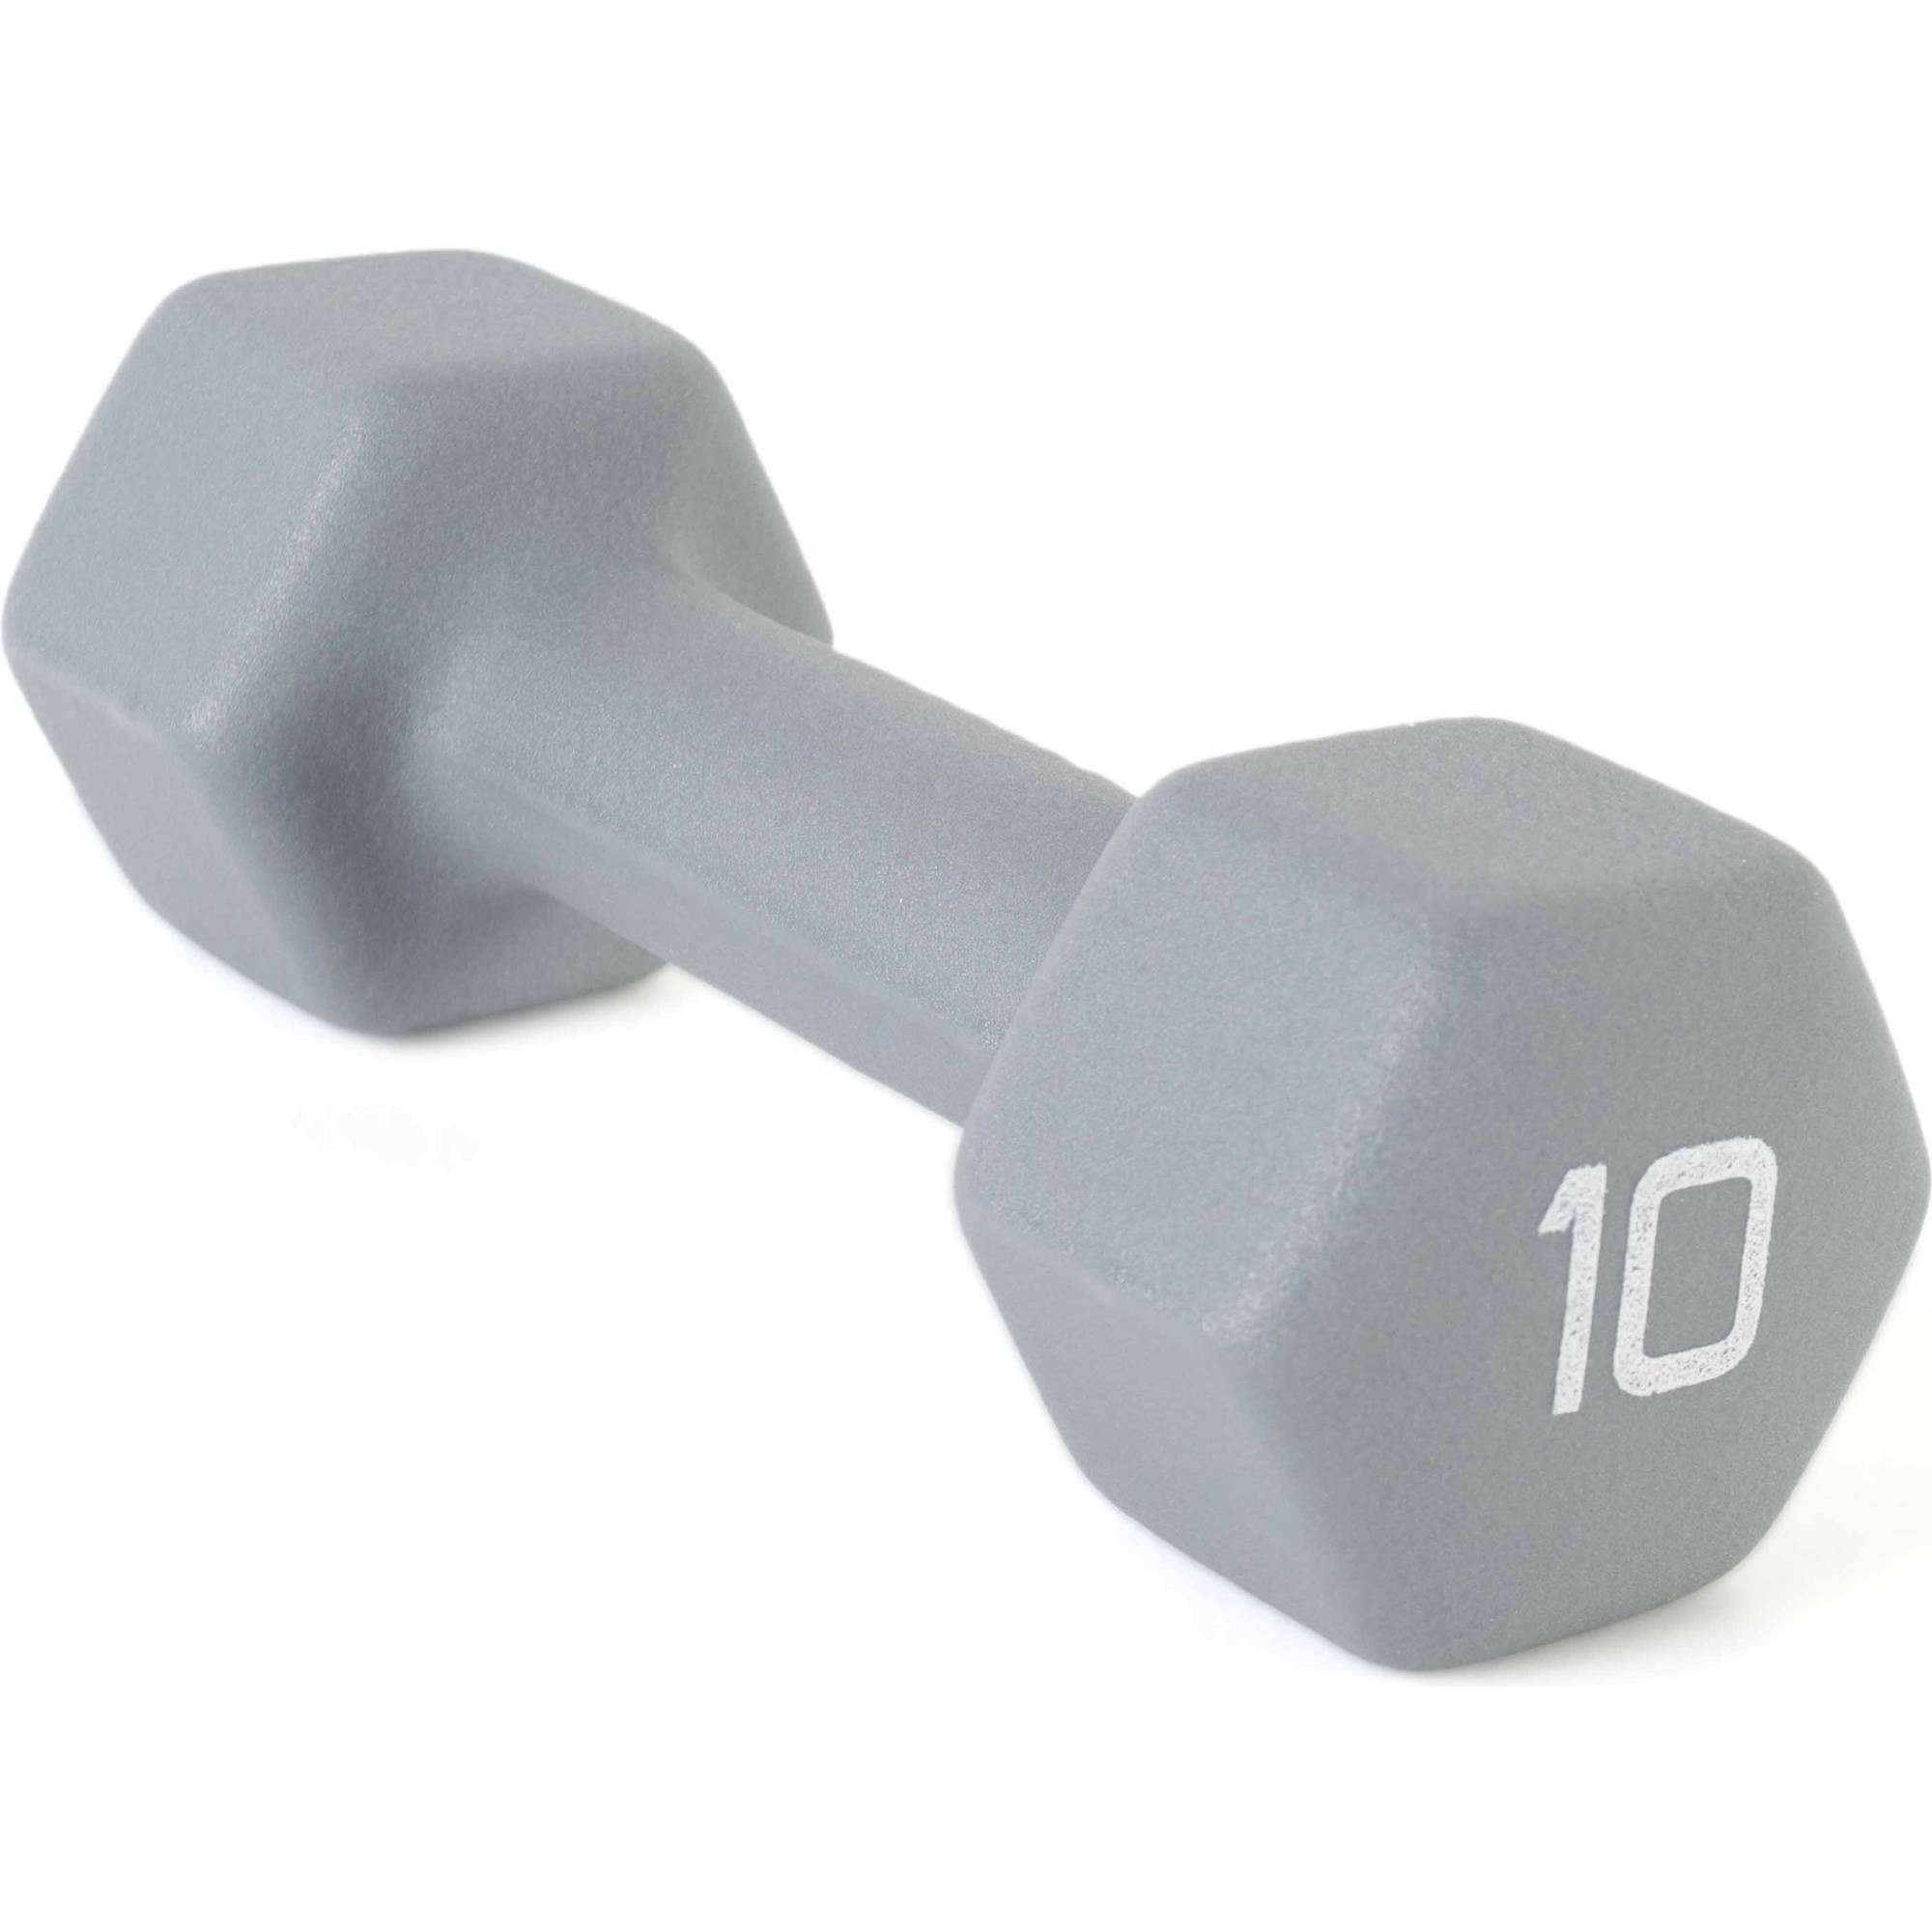 Set of 2 Neoprene Encased Dumbbell Hand Weights 6lbs/ea. !!30% OFF+FREE SHIP! 